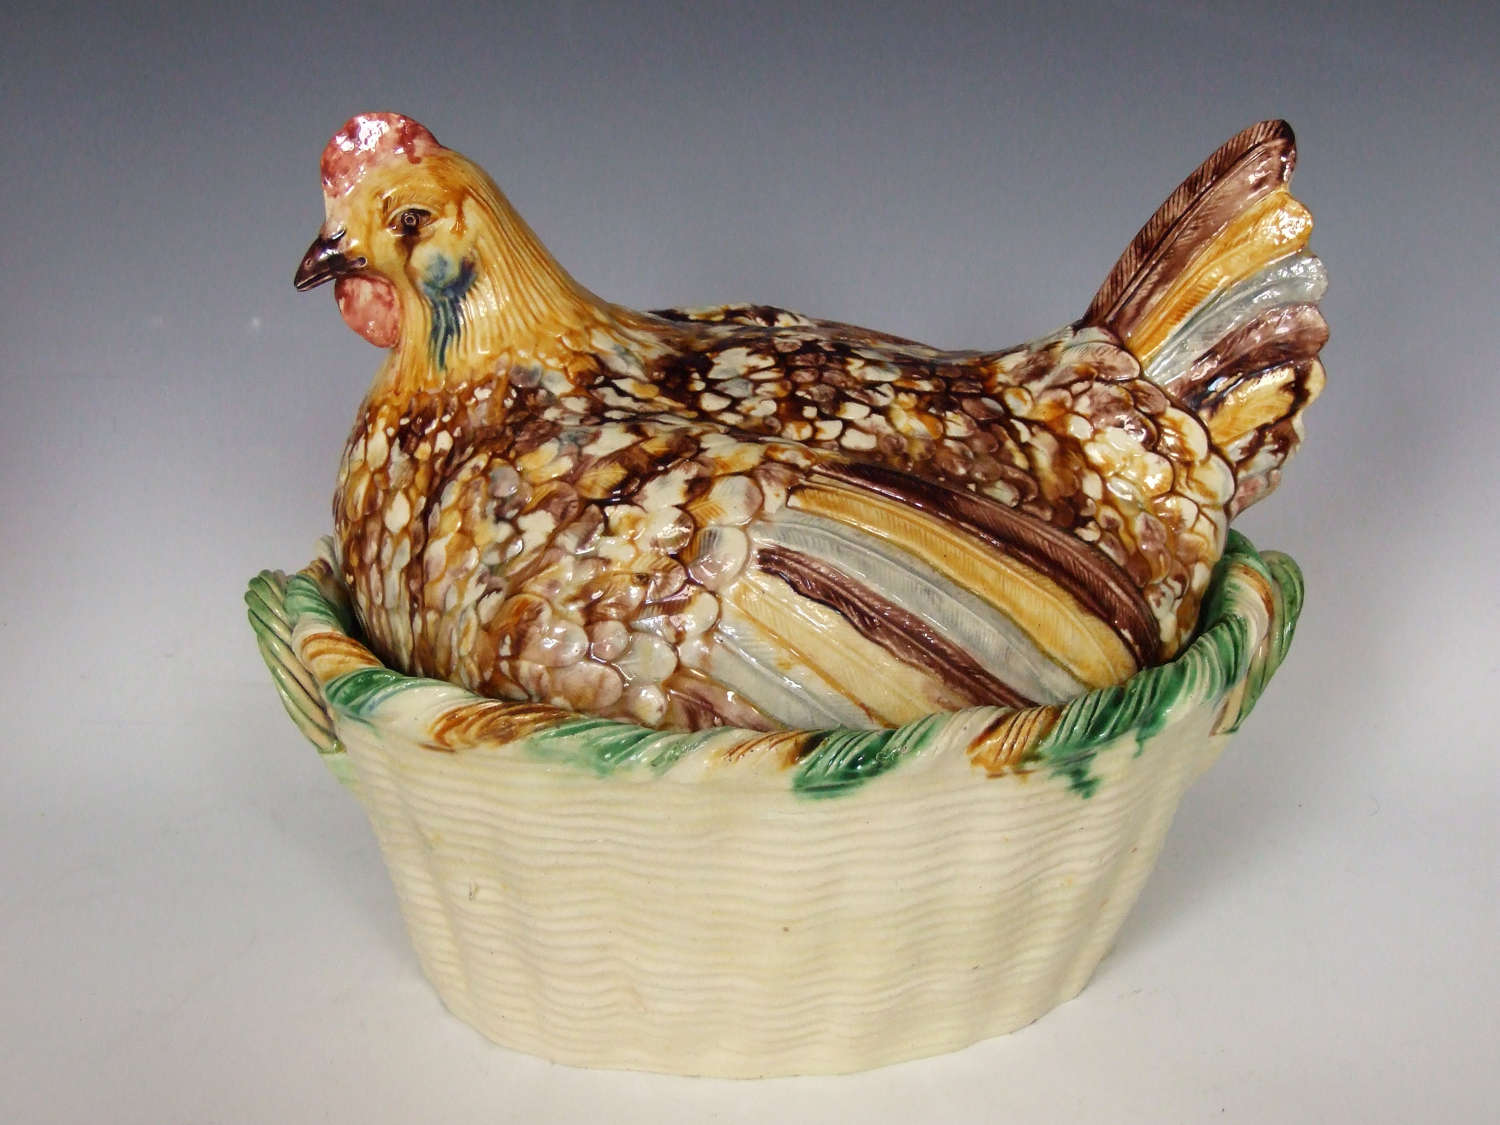 Highly unusual, rare and impressive large Palissy hen on basket tureen